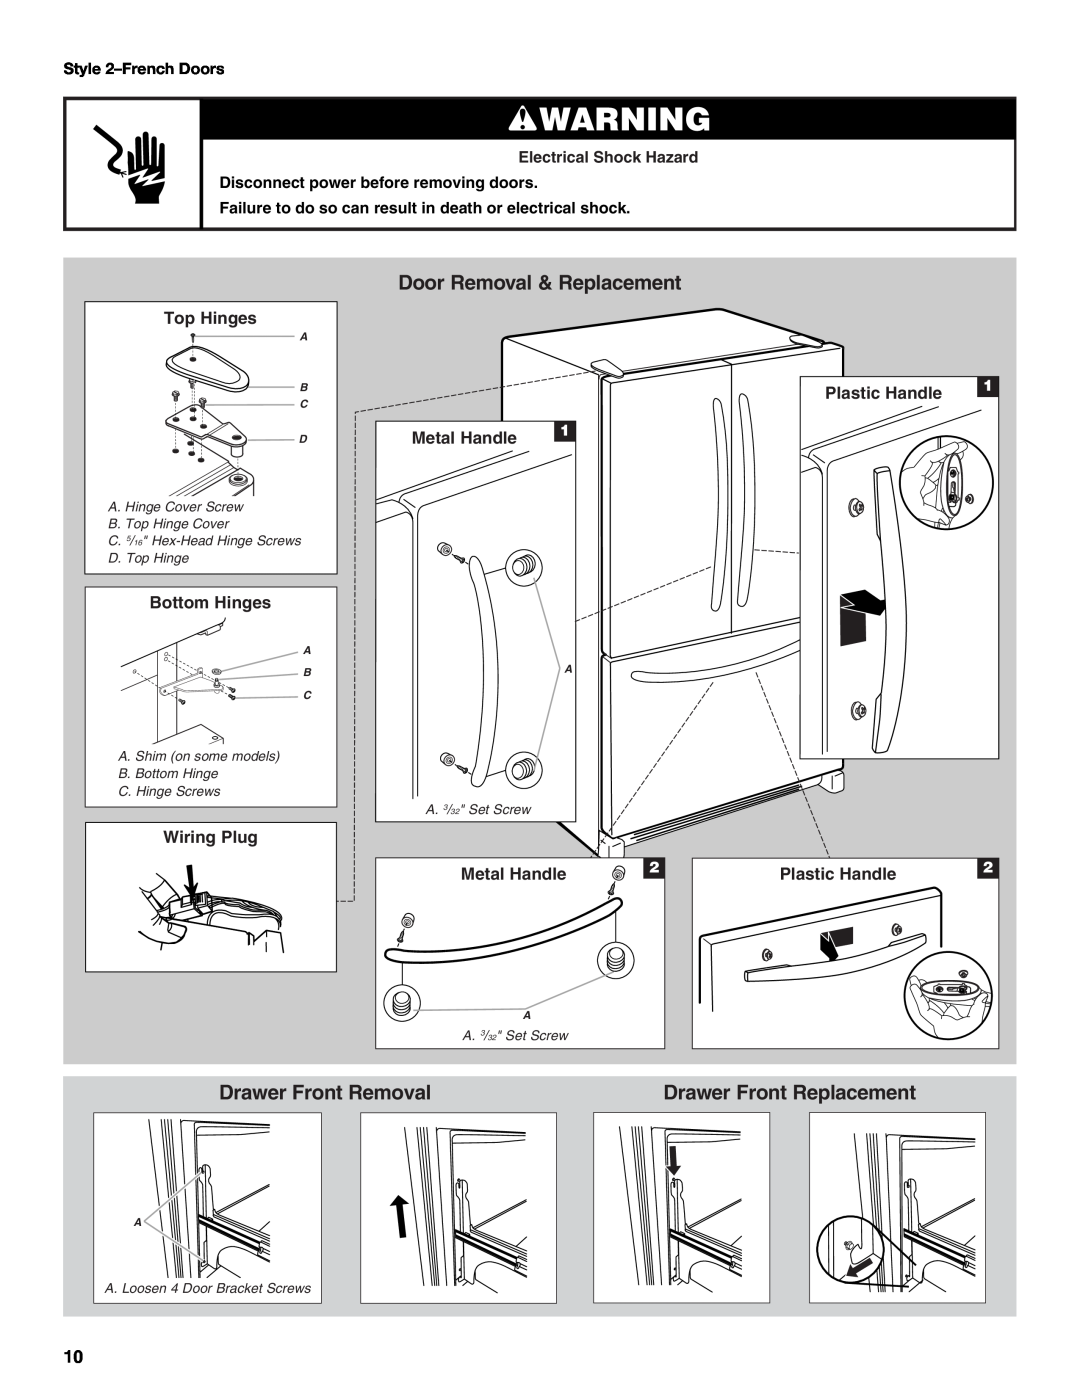 Maytag W10175446B Drawer Front Removal, Drawer Front Replacement, Top Hinges, Bottom Hinges, Wiring Plug, Metal Handle 